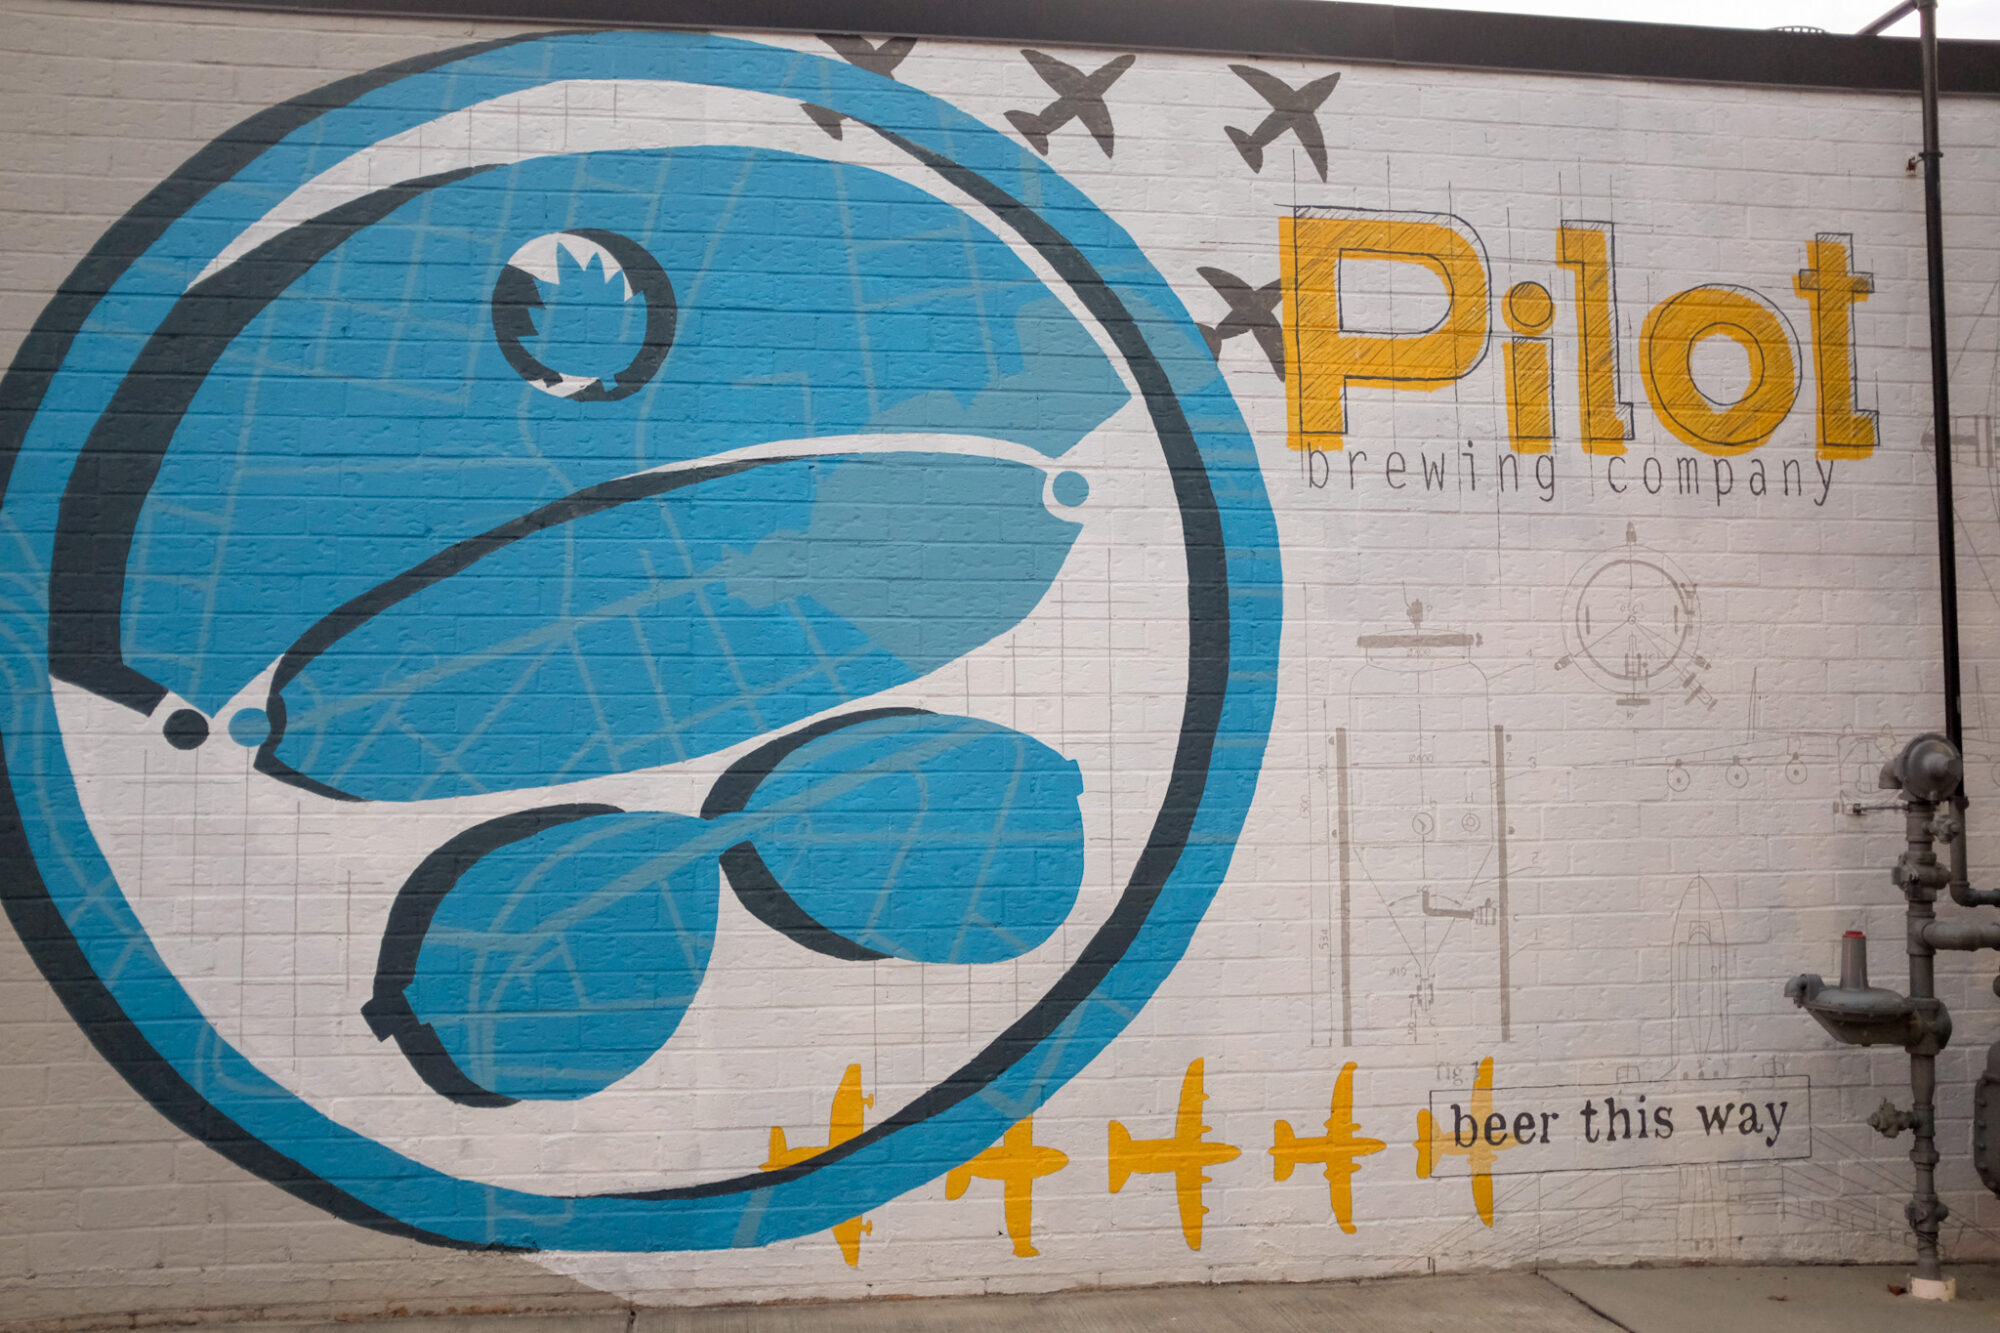 A mural for Pilot Brewing Co.